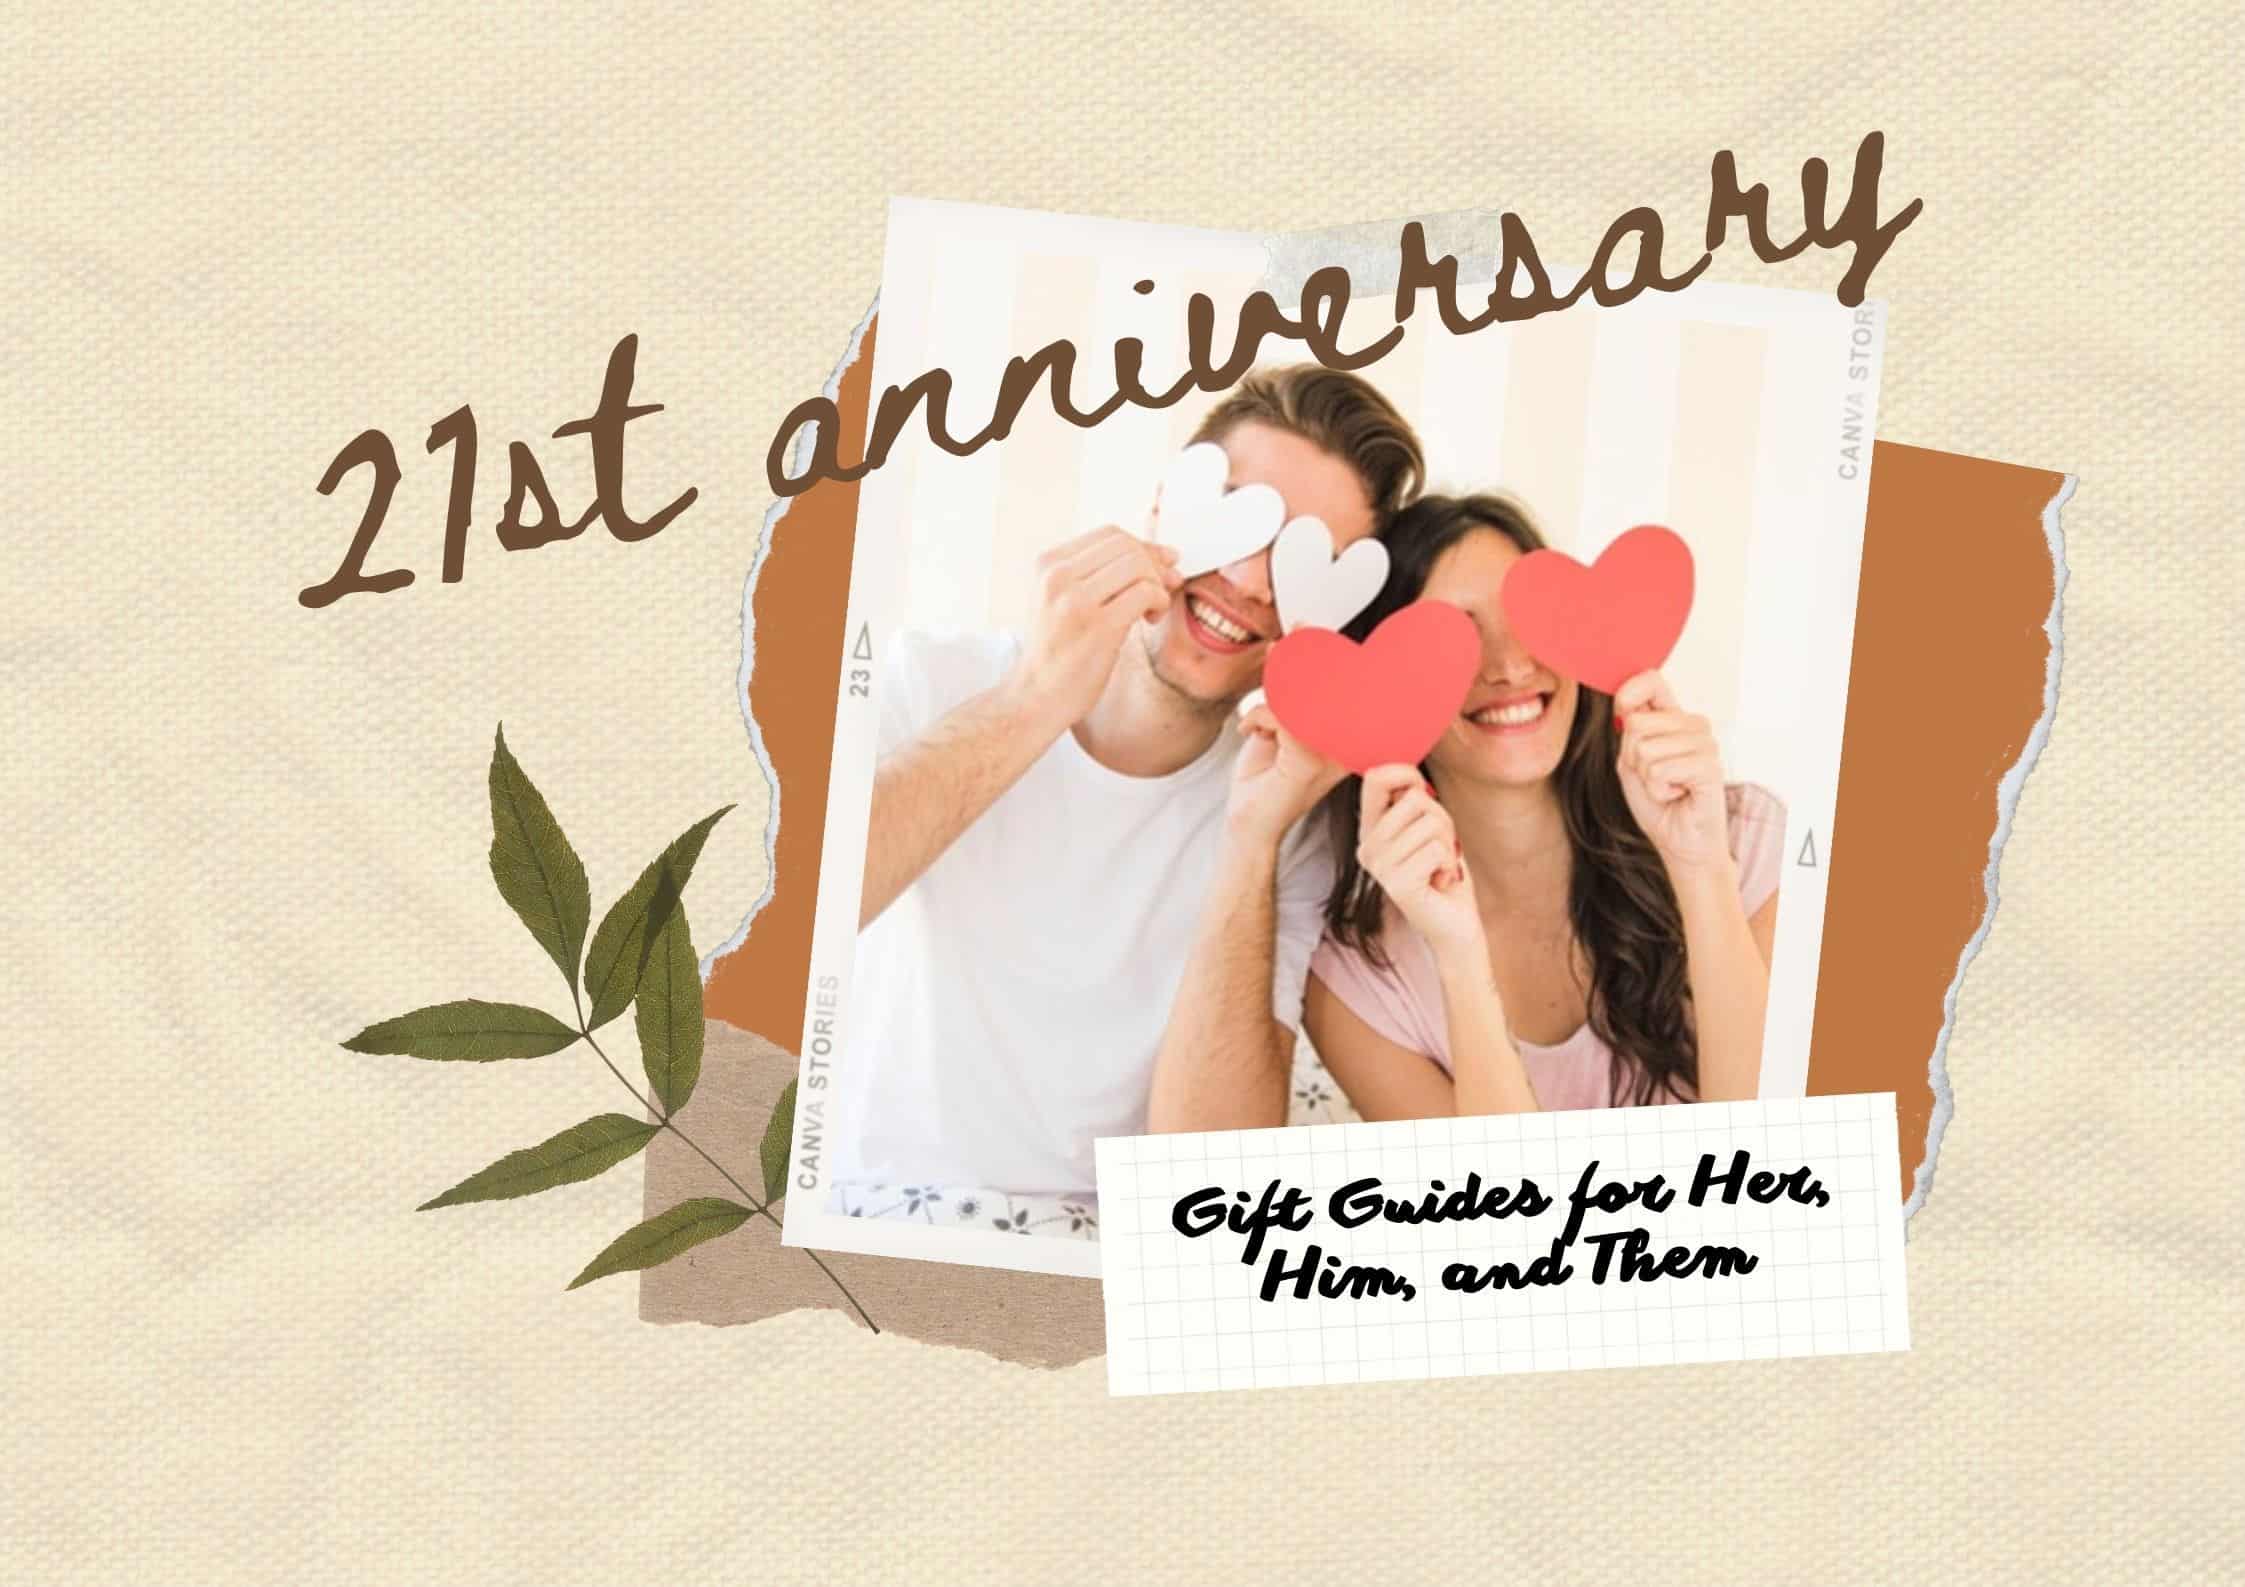 29+ Amazing 21st Anniversary Gift Ideas for Her, Him, and Them